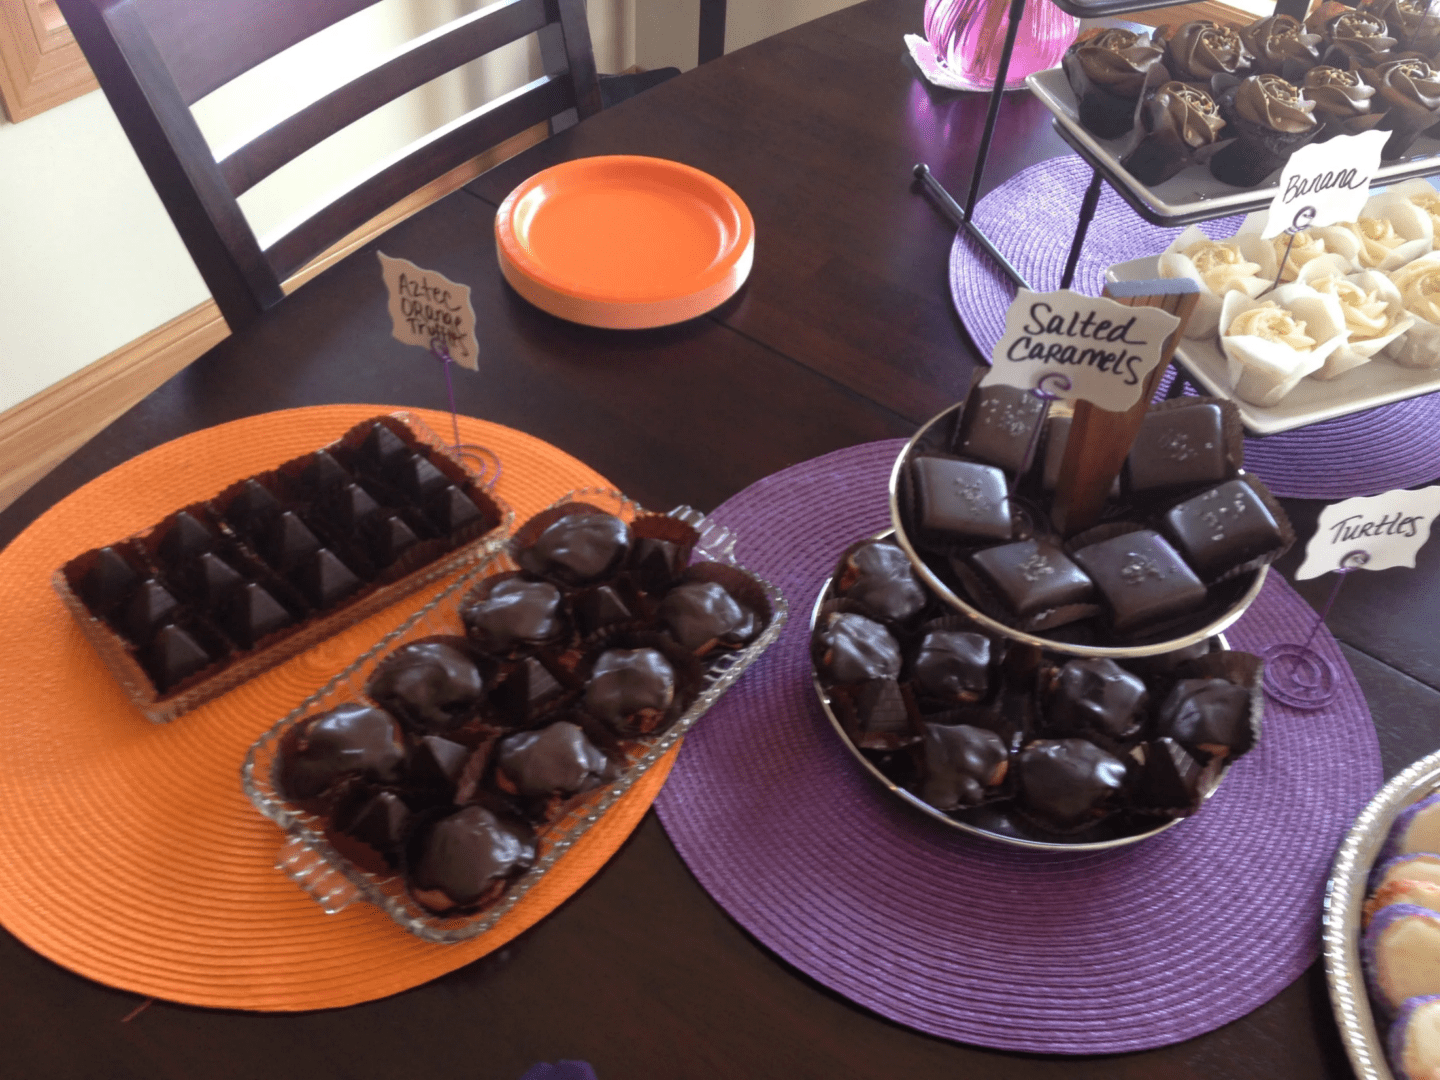 A table with two plates of chocolate covered candies.